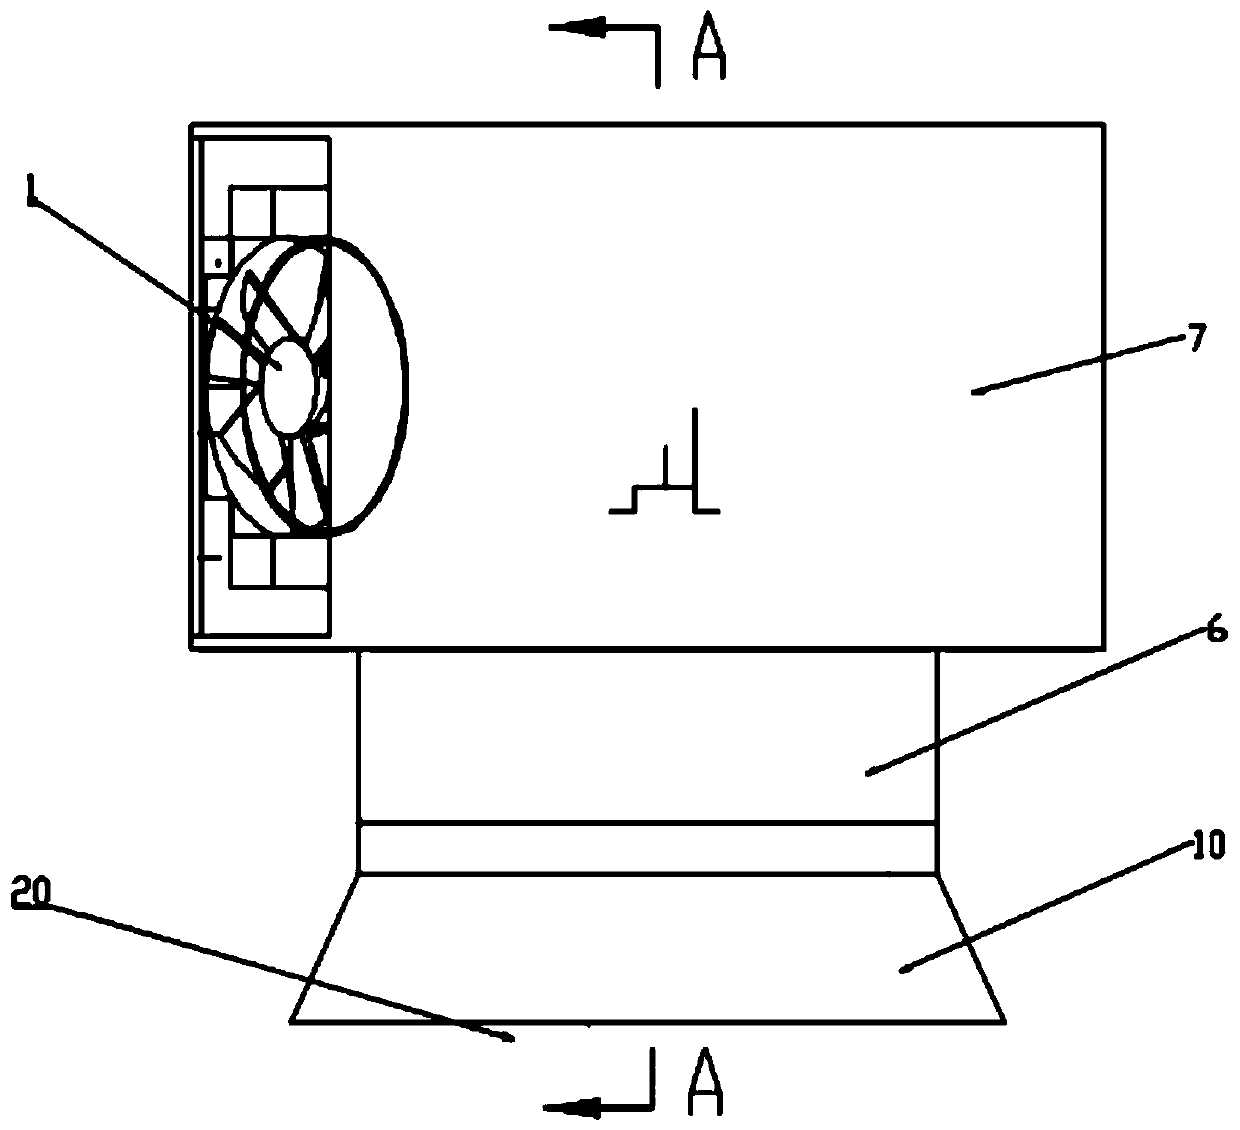 Heat-convection heat exchange device based on vortex ring low-speed circulation air supply